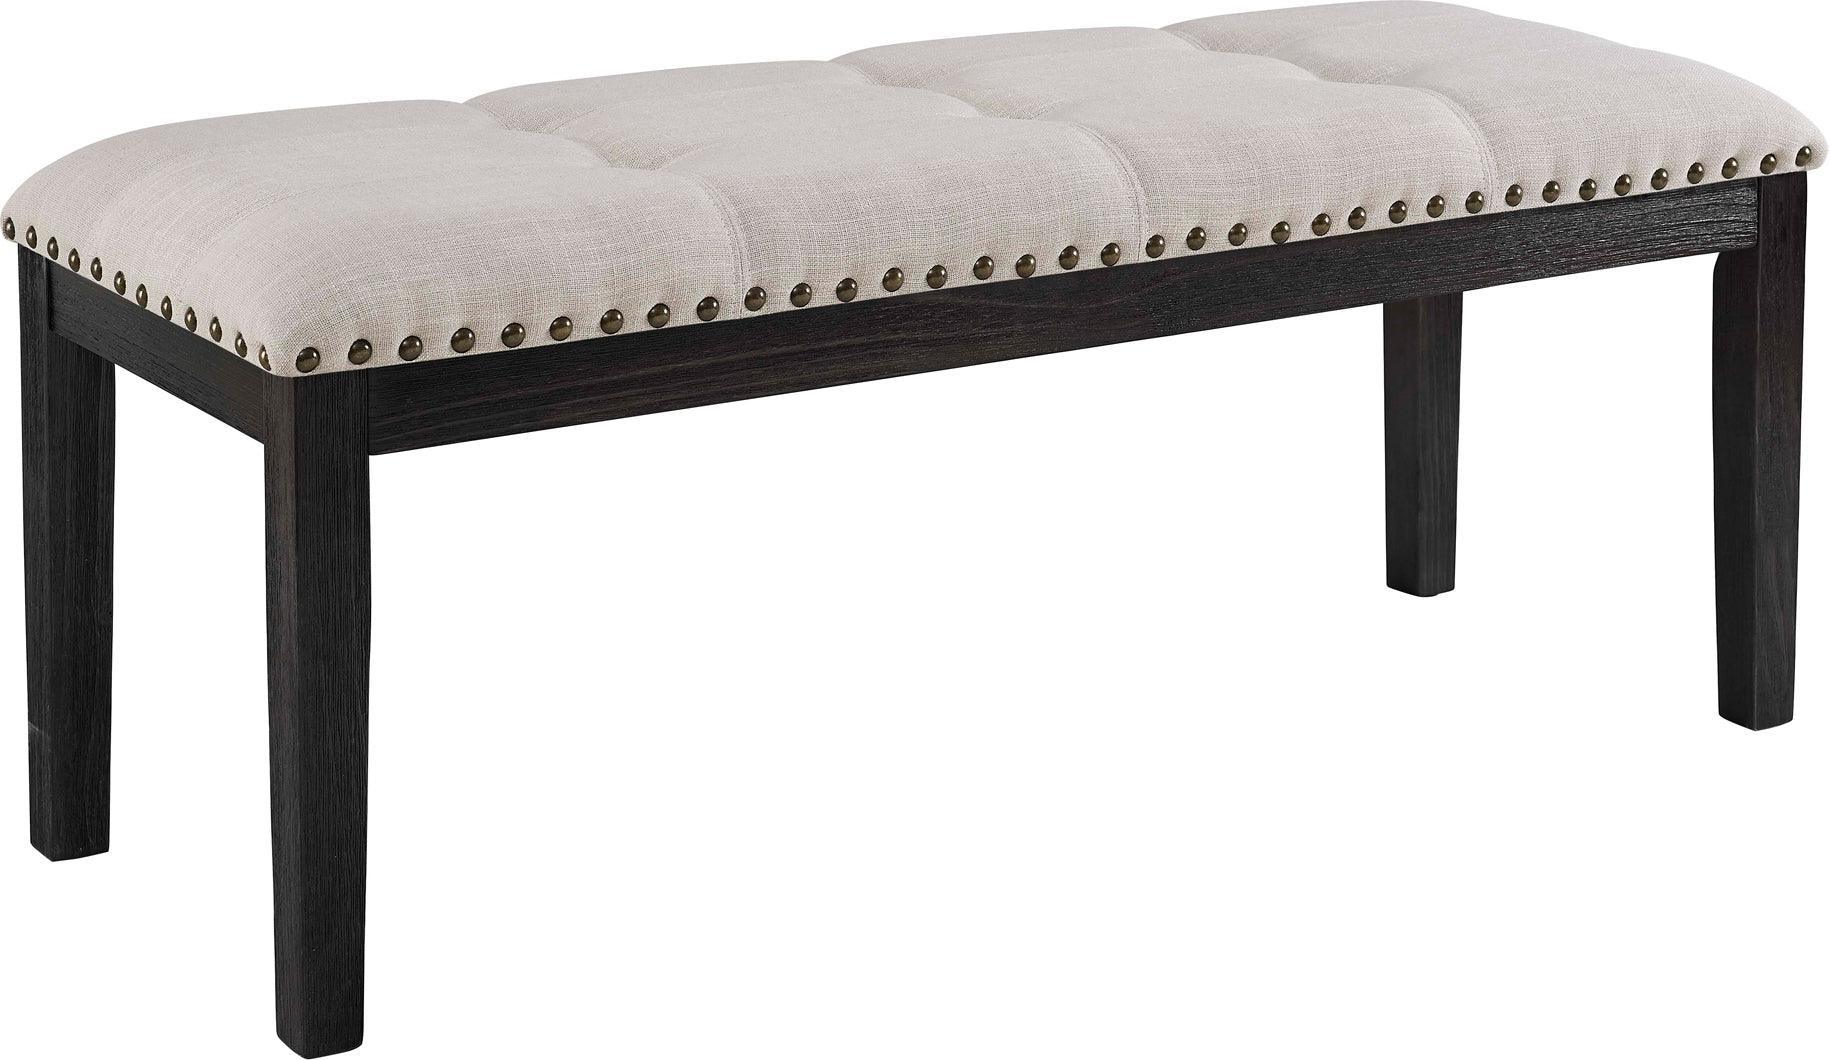 Elements Benches - Bradley Upholstered Bench